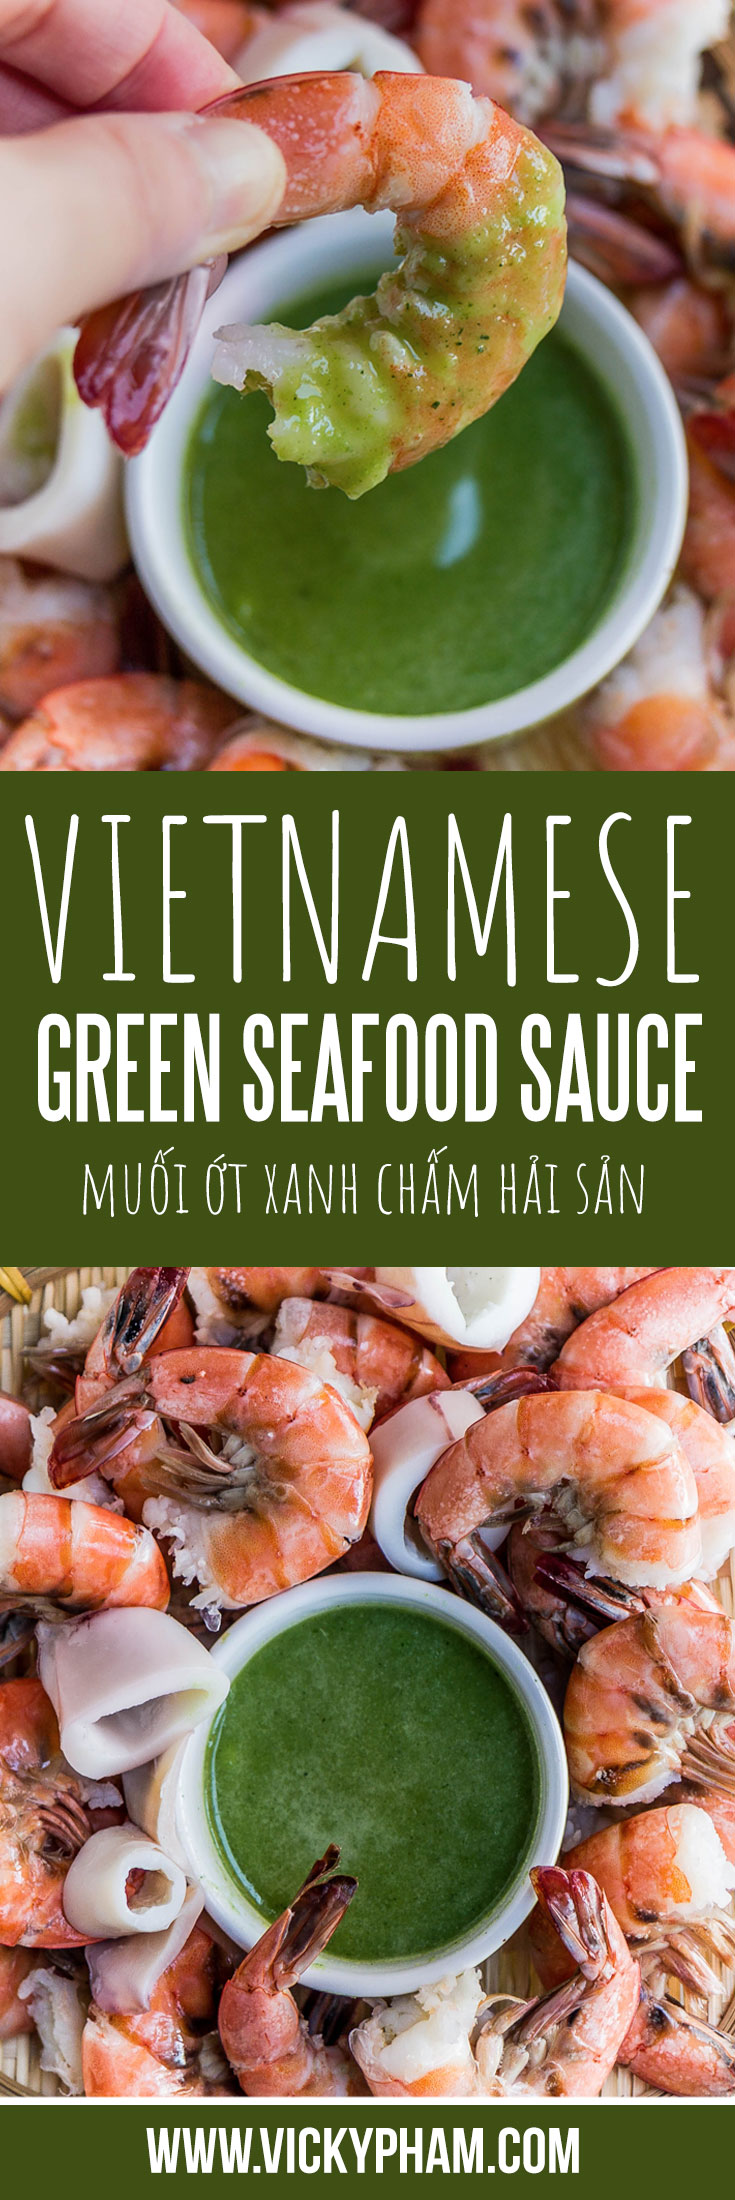 Vietnamese Green Seafood Sauce with Condensed Milk (Muoi Ot Xanh Sua ...